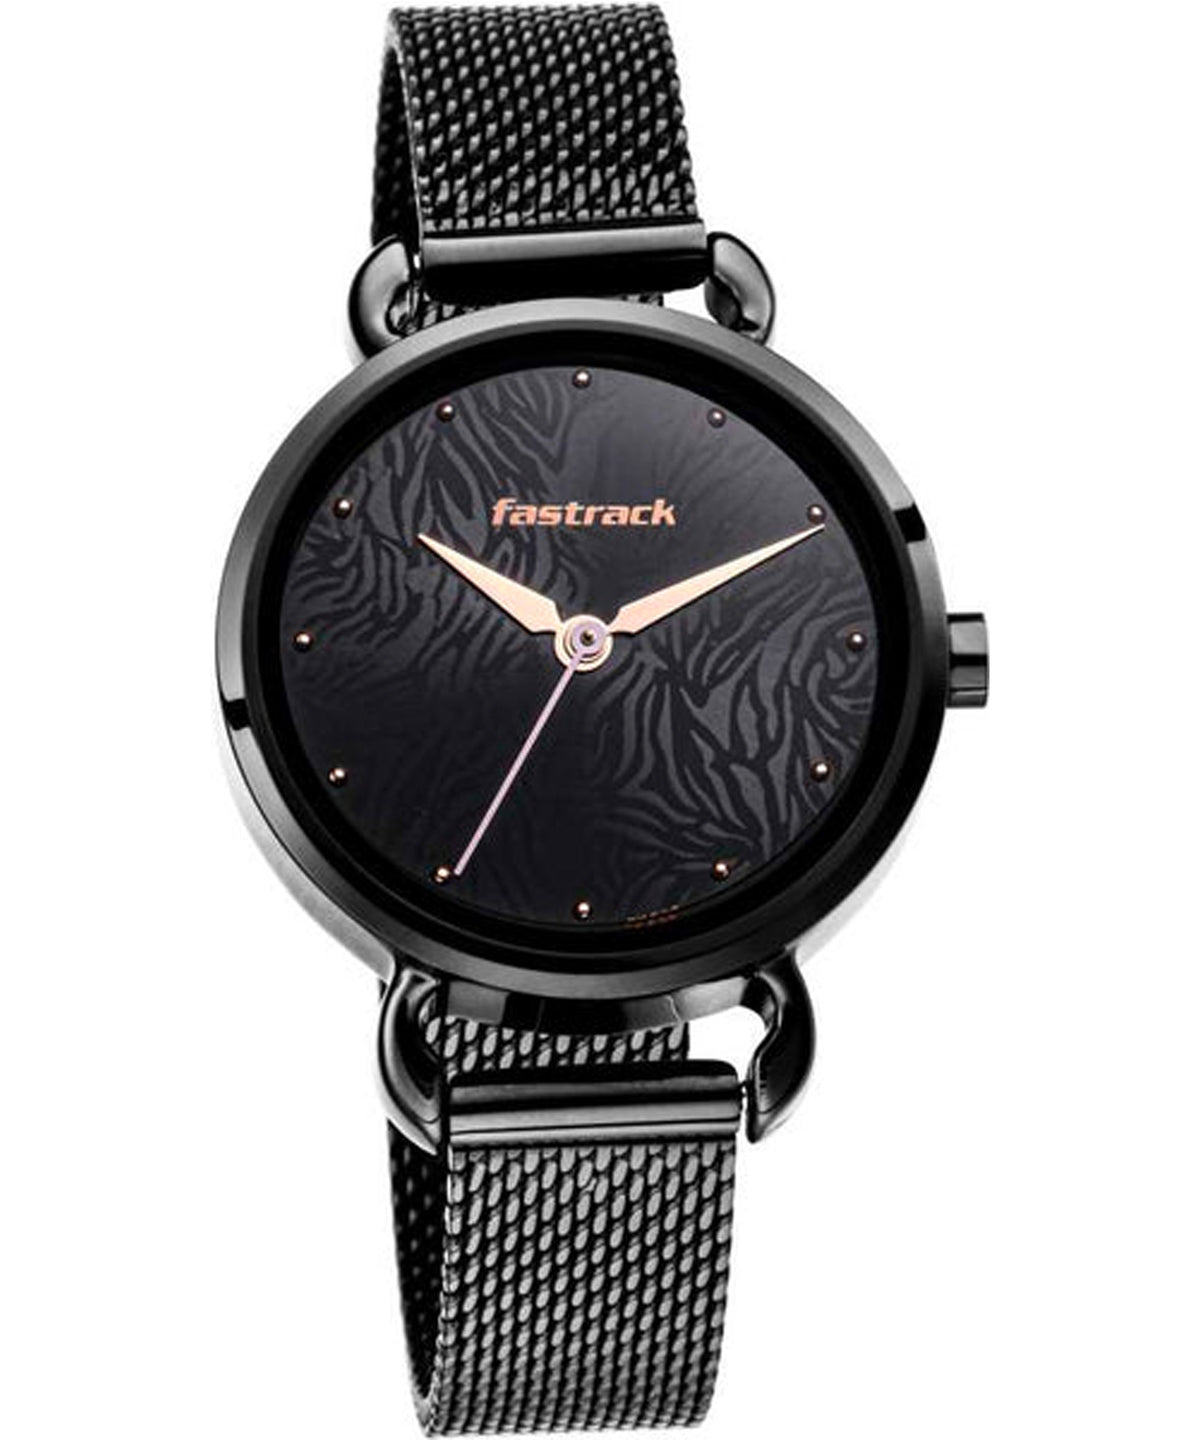 Fastrack Women's Analog Watch, Black Dial & Black Stainless Steel Strap, 6221NM02